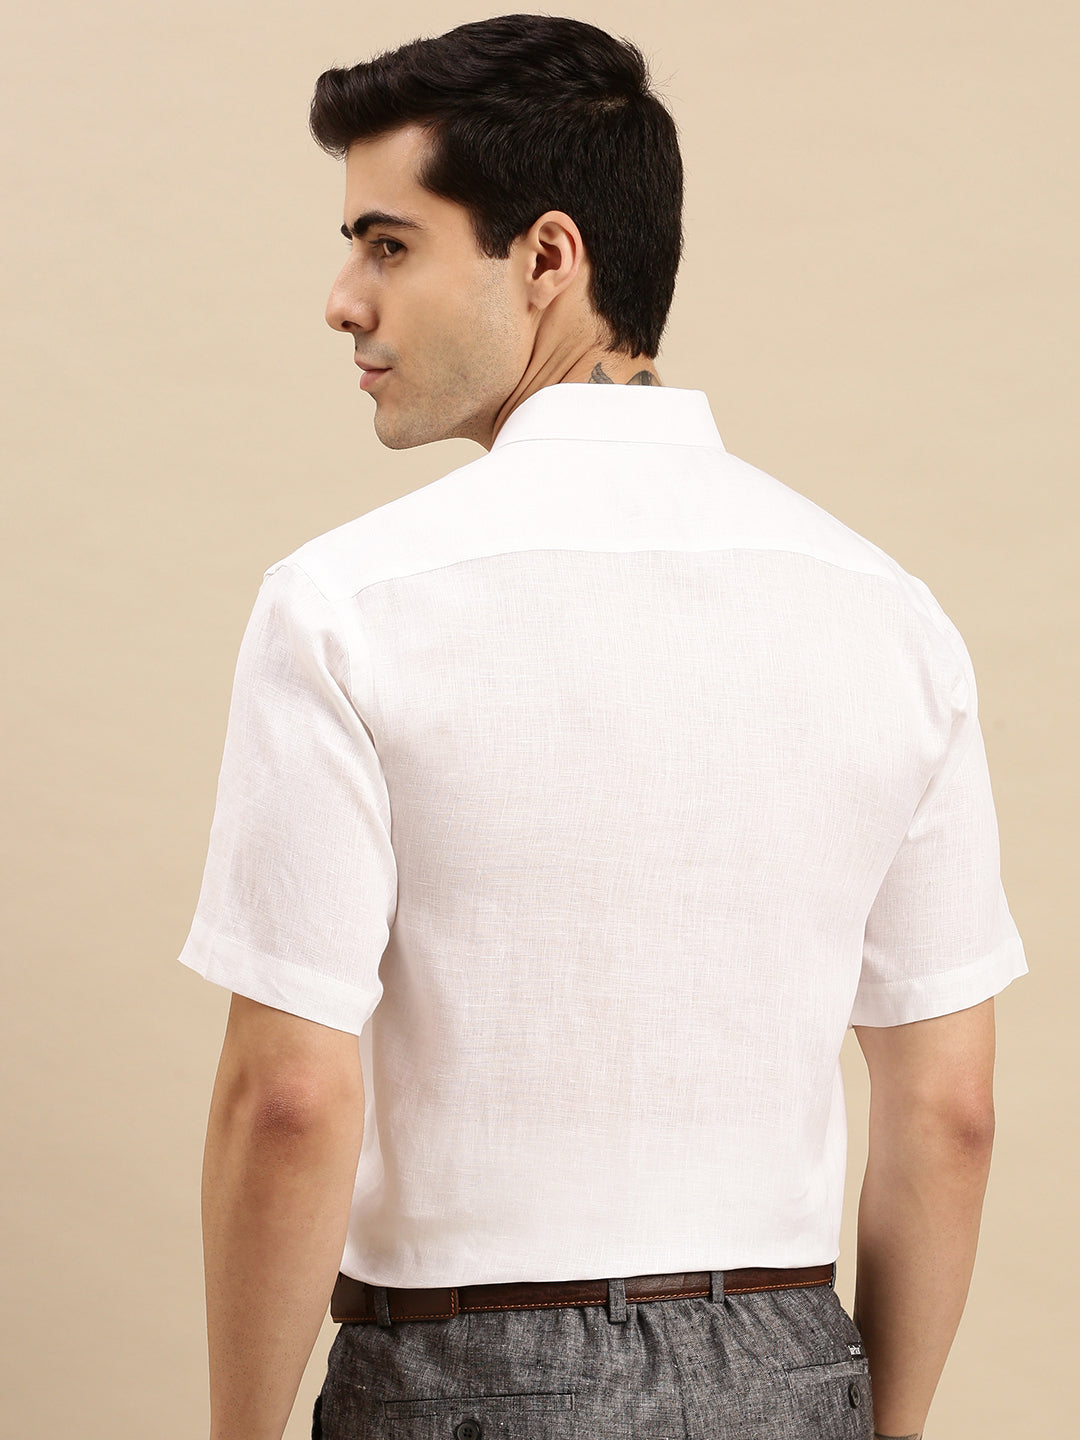 Mens Smart Fit 100% Cotton White Shirt Half Sleeves White Trend -Back view